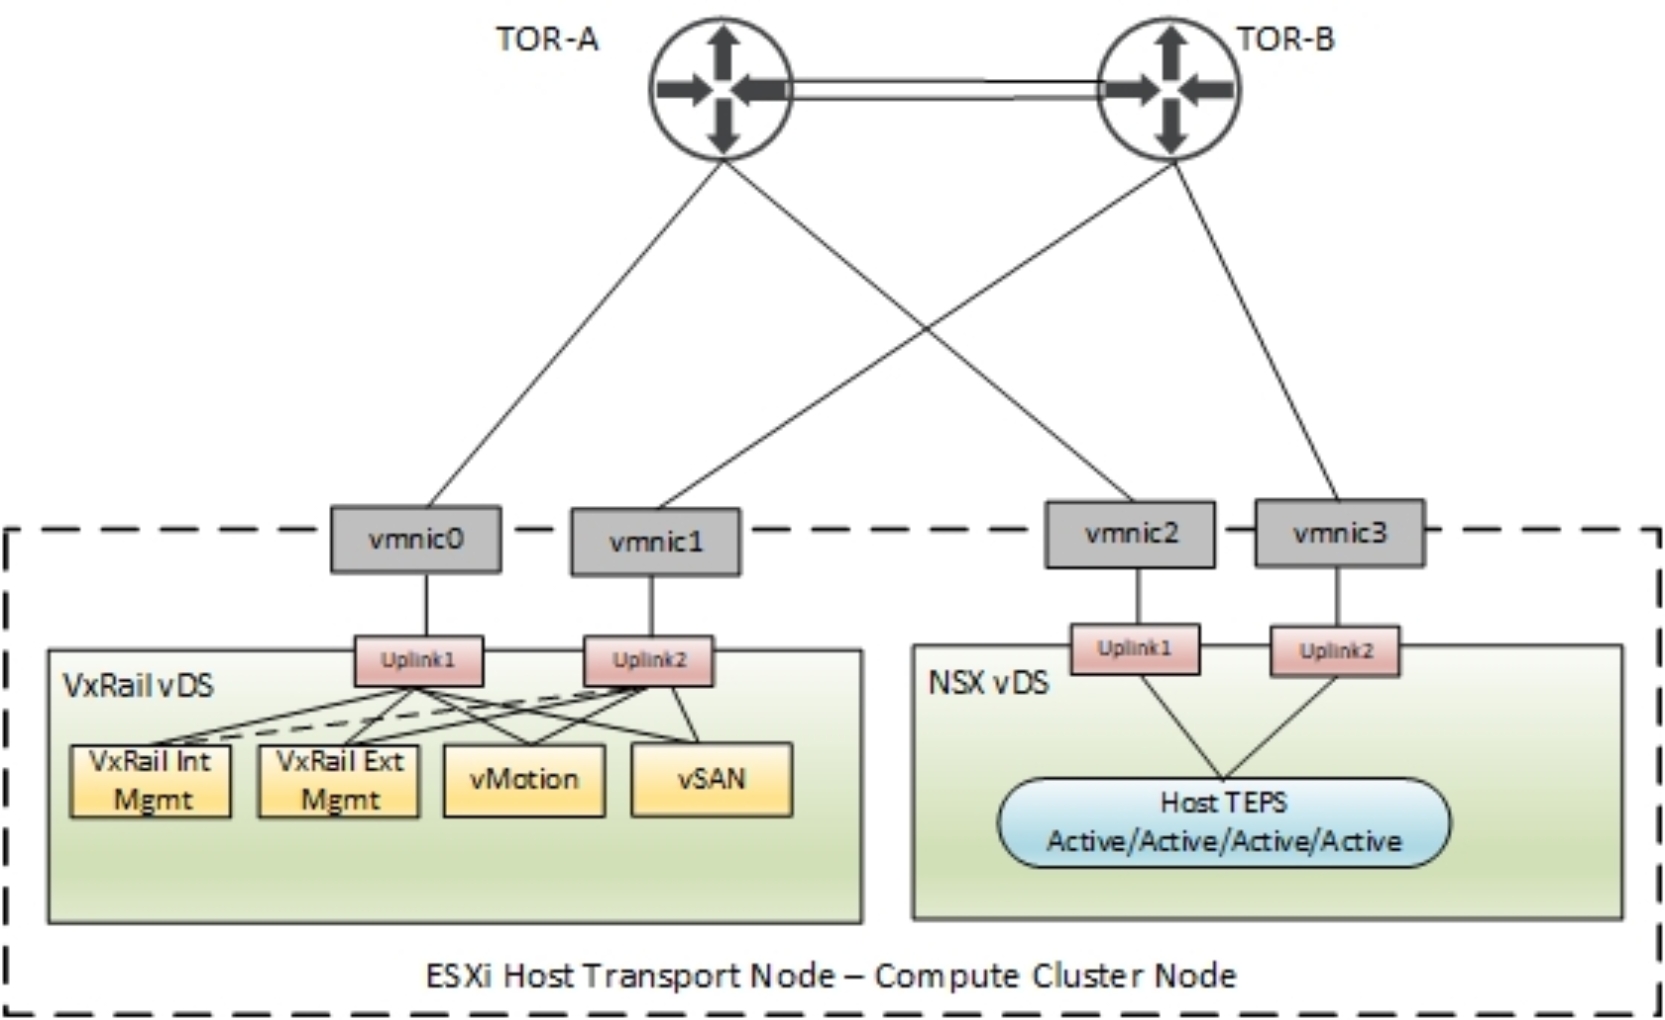 This figure shows the Mgmt WLD node connectivity (2 or 4 uplinks)